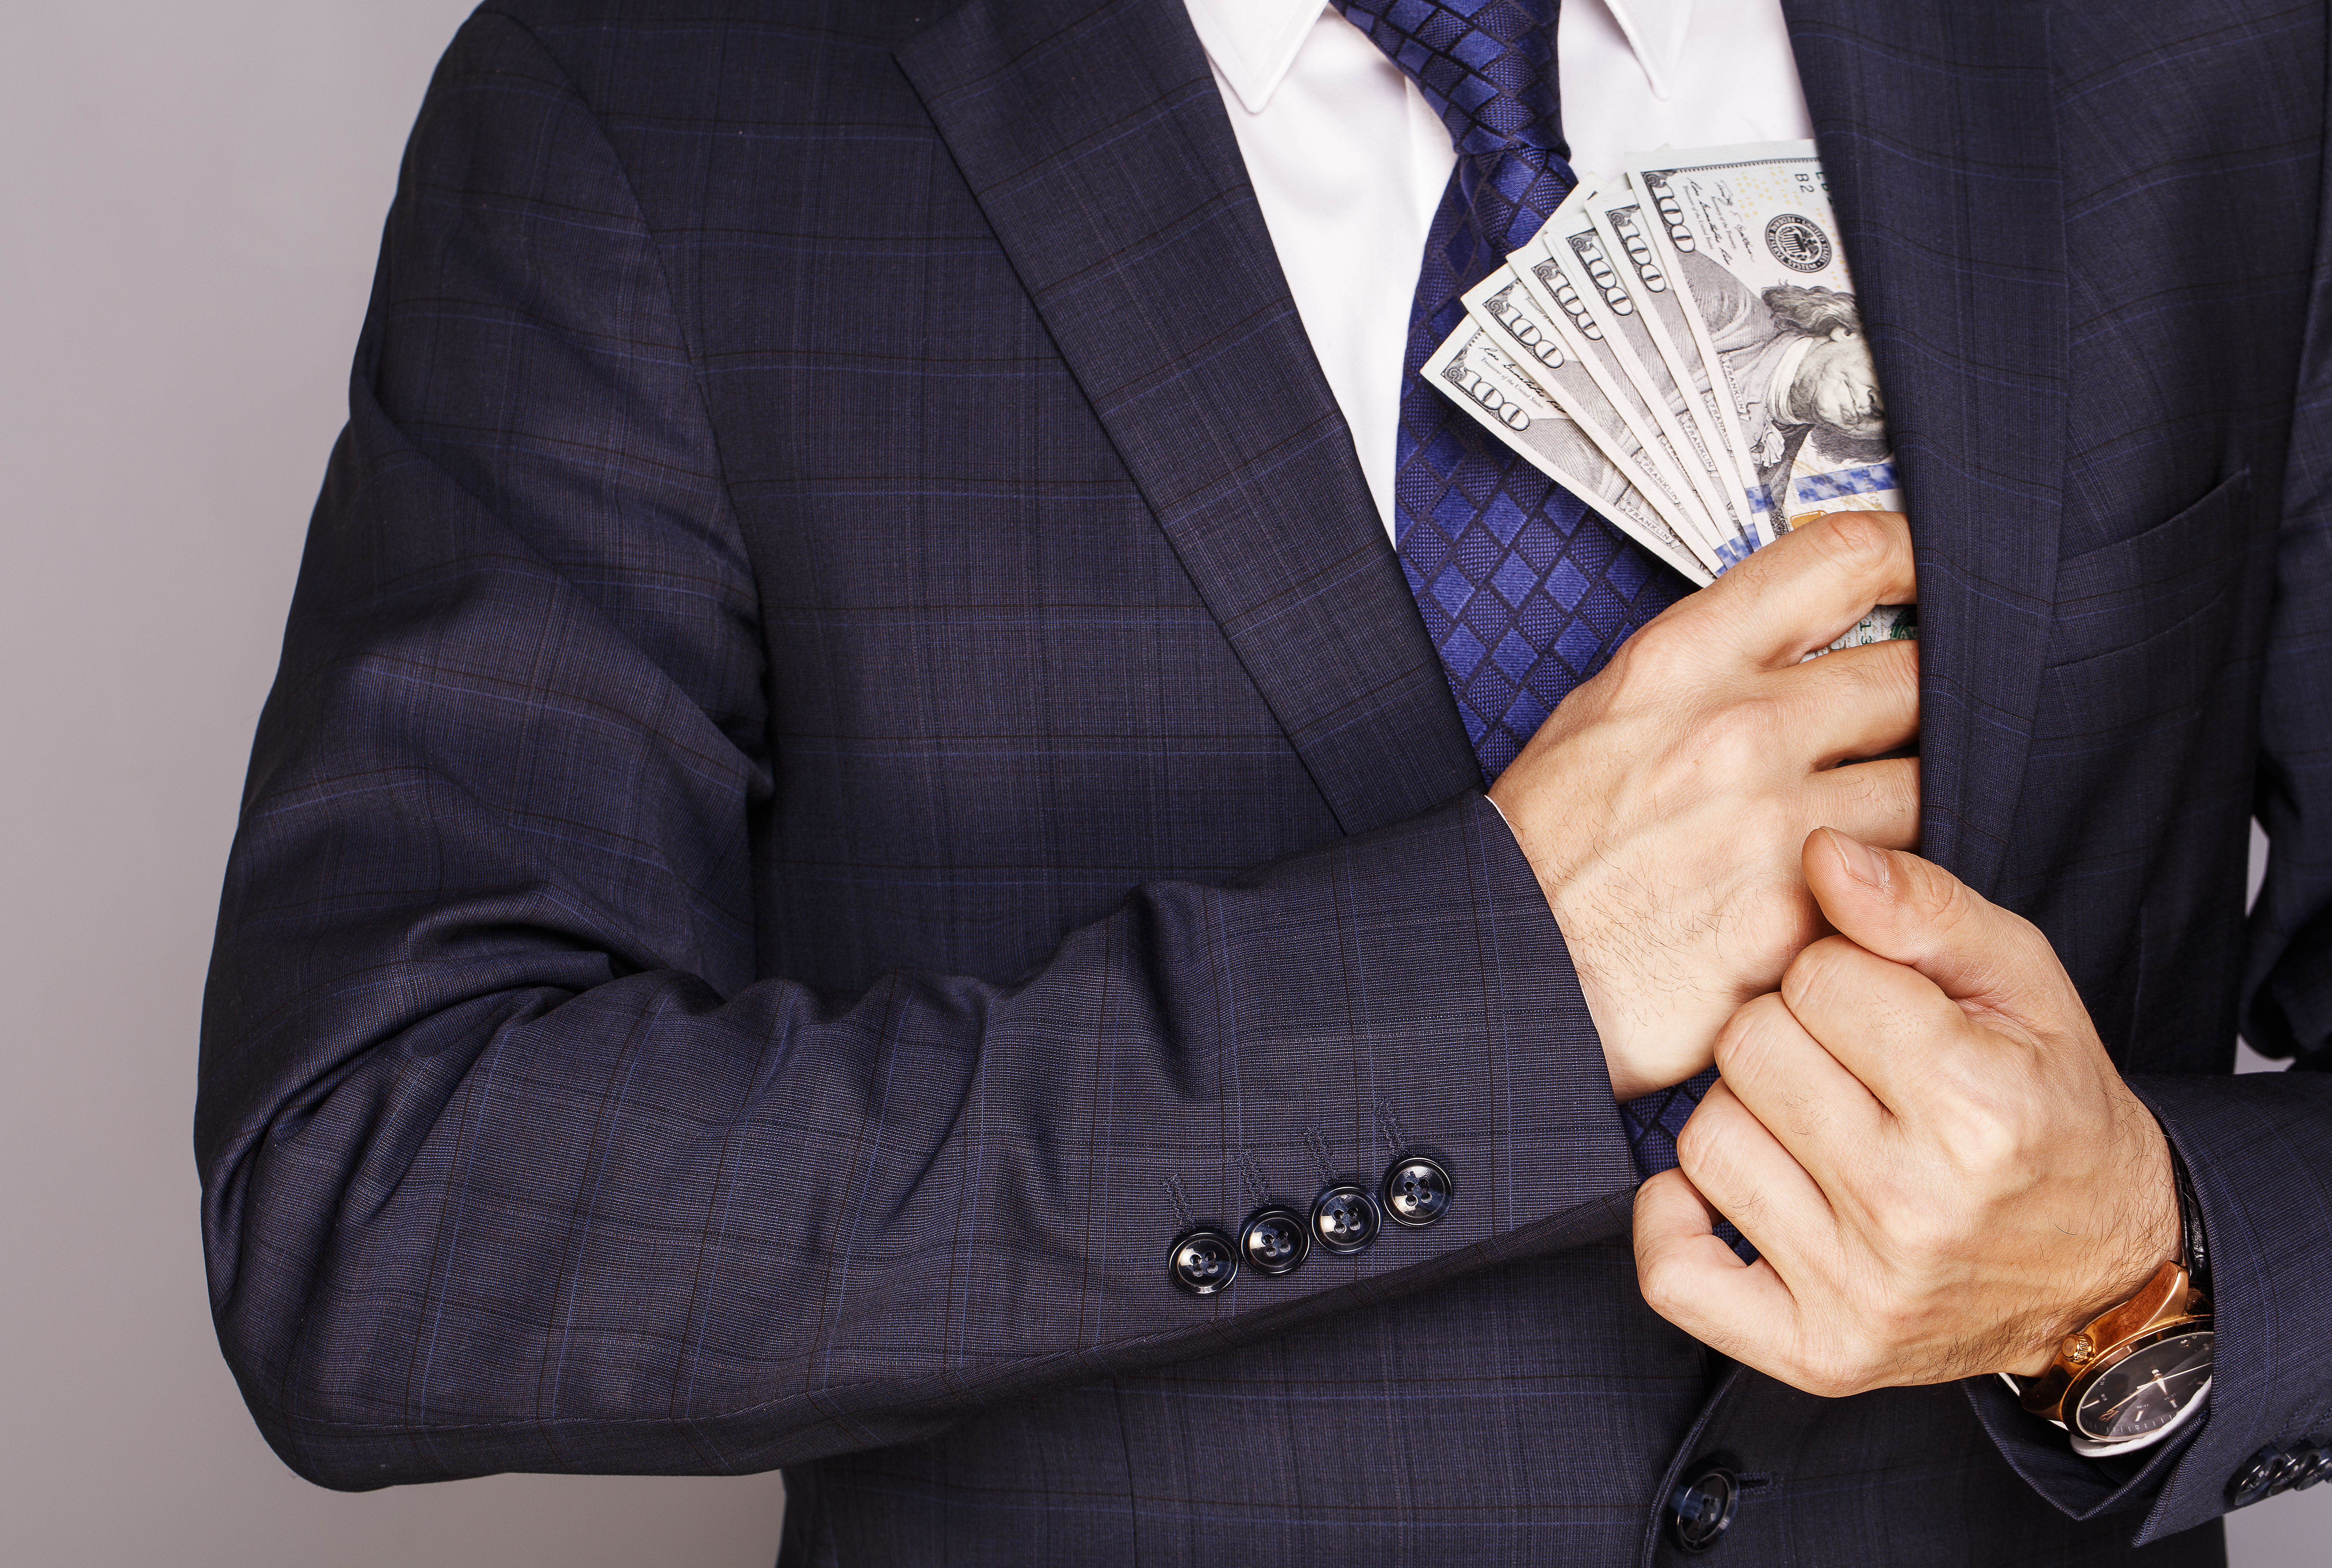 To Catch a Thief: 6 Ways Employers Rip Off Employees